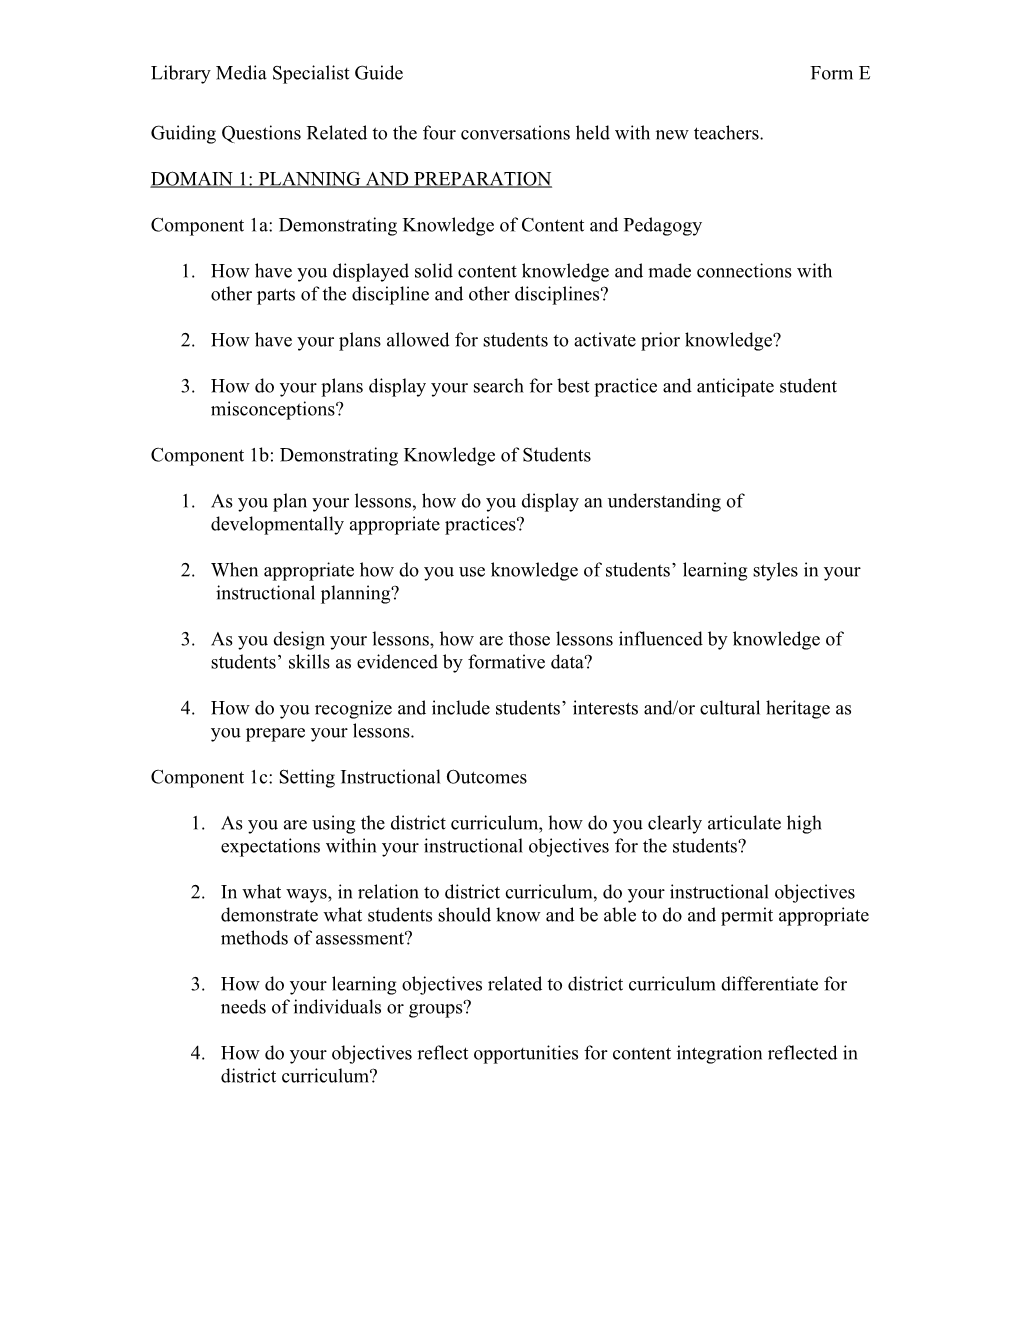 Guiding Questions Related to the Four Conversations Held with New Teachers